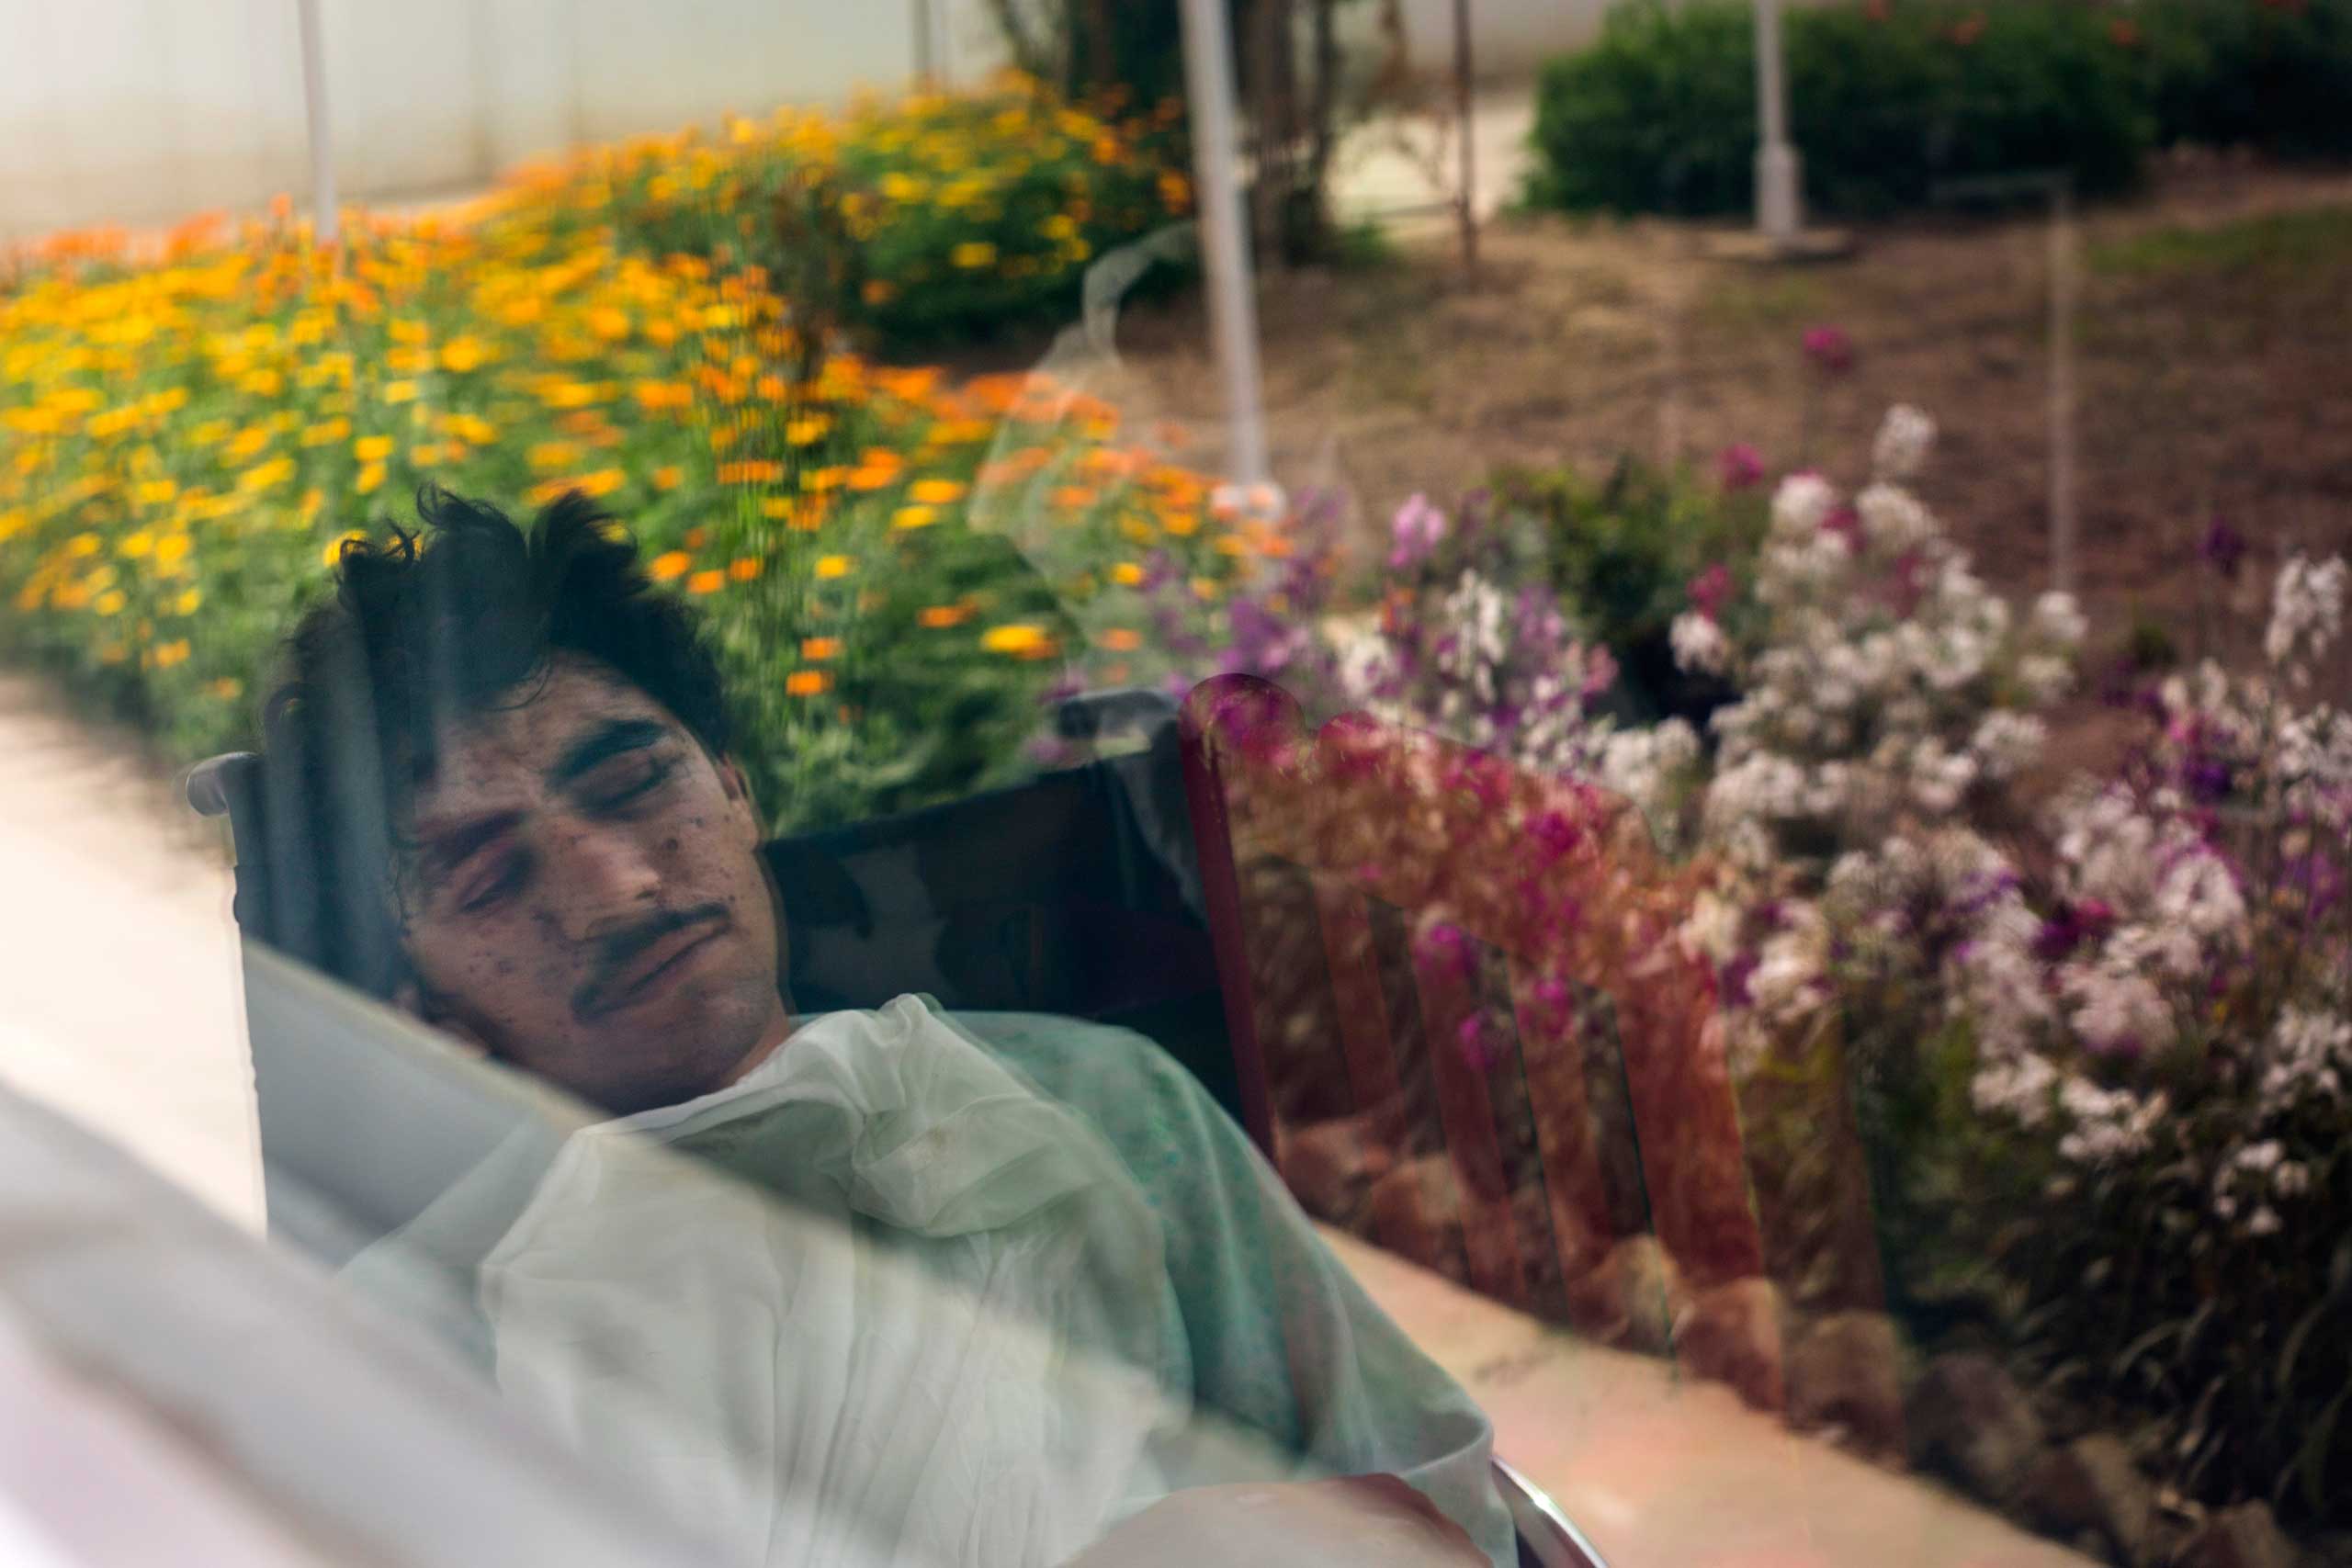 Kharim Ahmad, 22, suffered shrapnel wounds on his face and the loss of a leg from fighting in Sangin. He was being treated at the Emergency hospital in Lashkar Gah, Afghanistan on March 25, 2015.